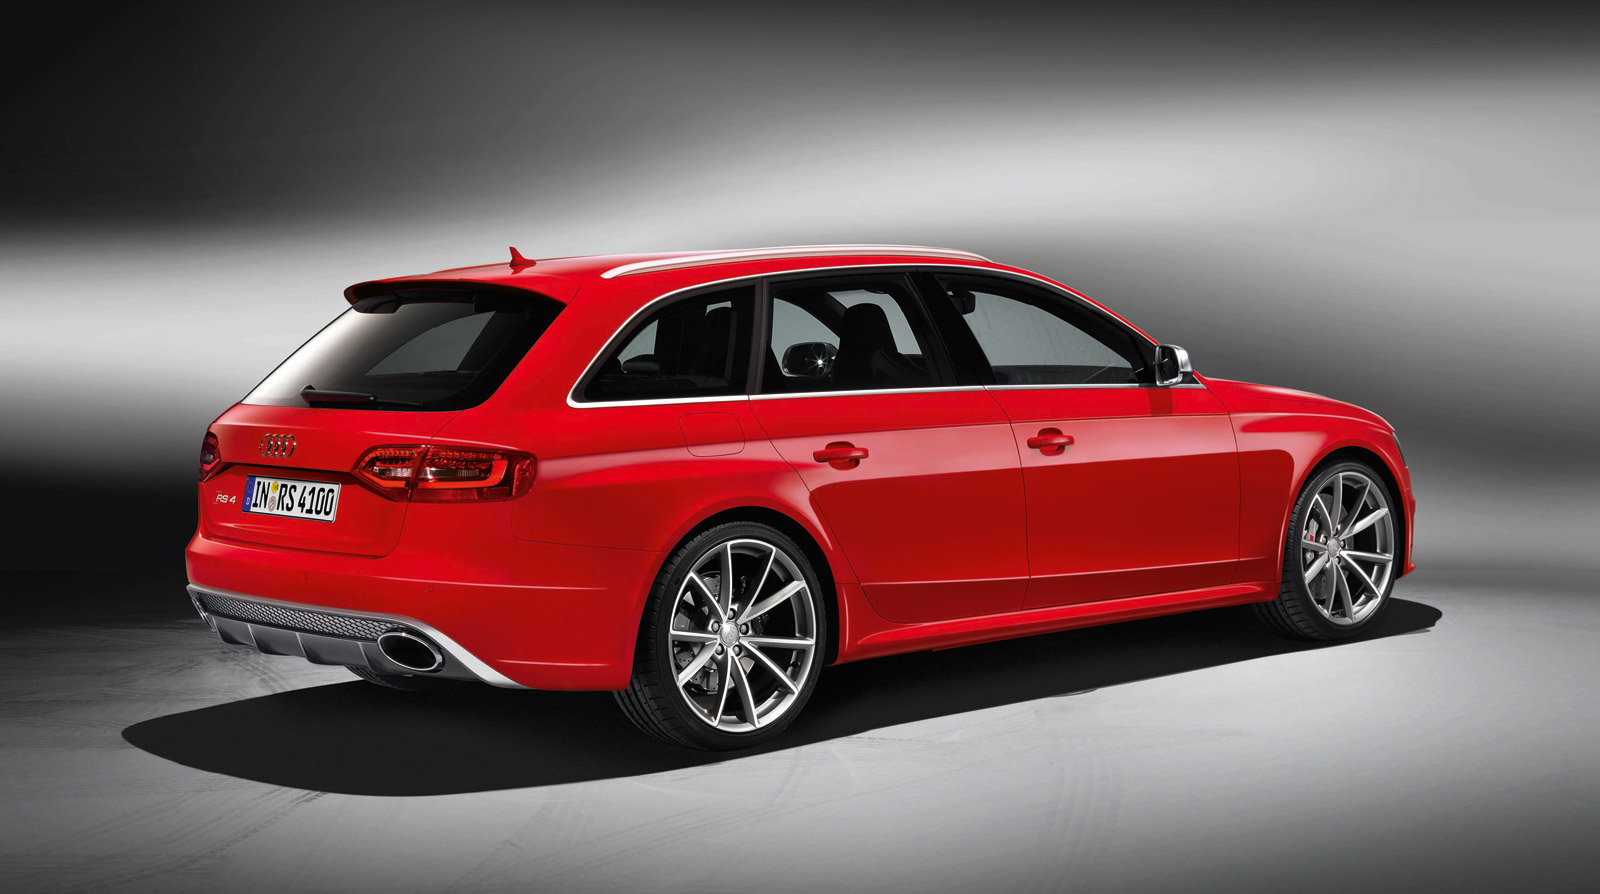 2013 Audi RS4 Avant: Official Details And Mega Gallery